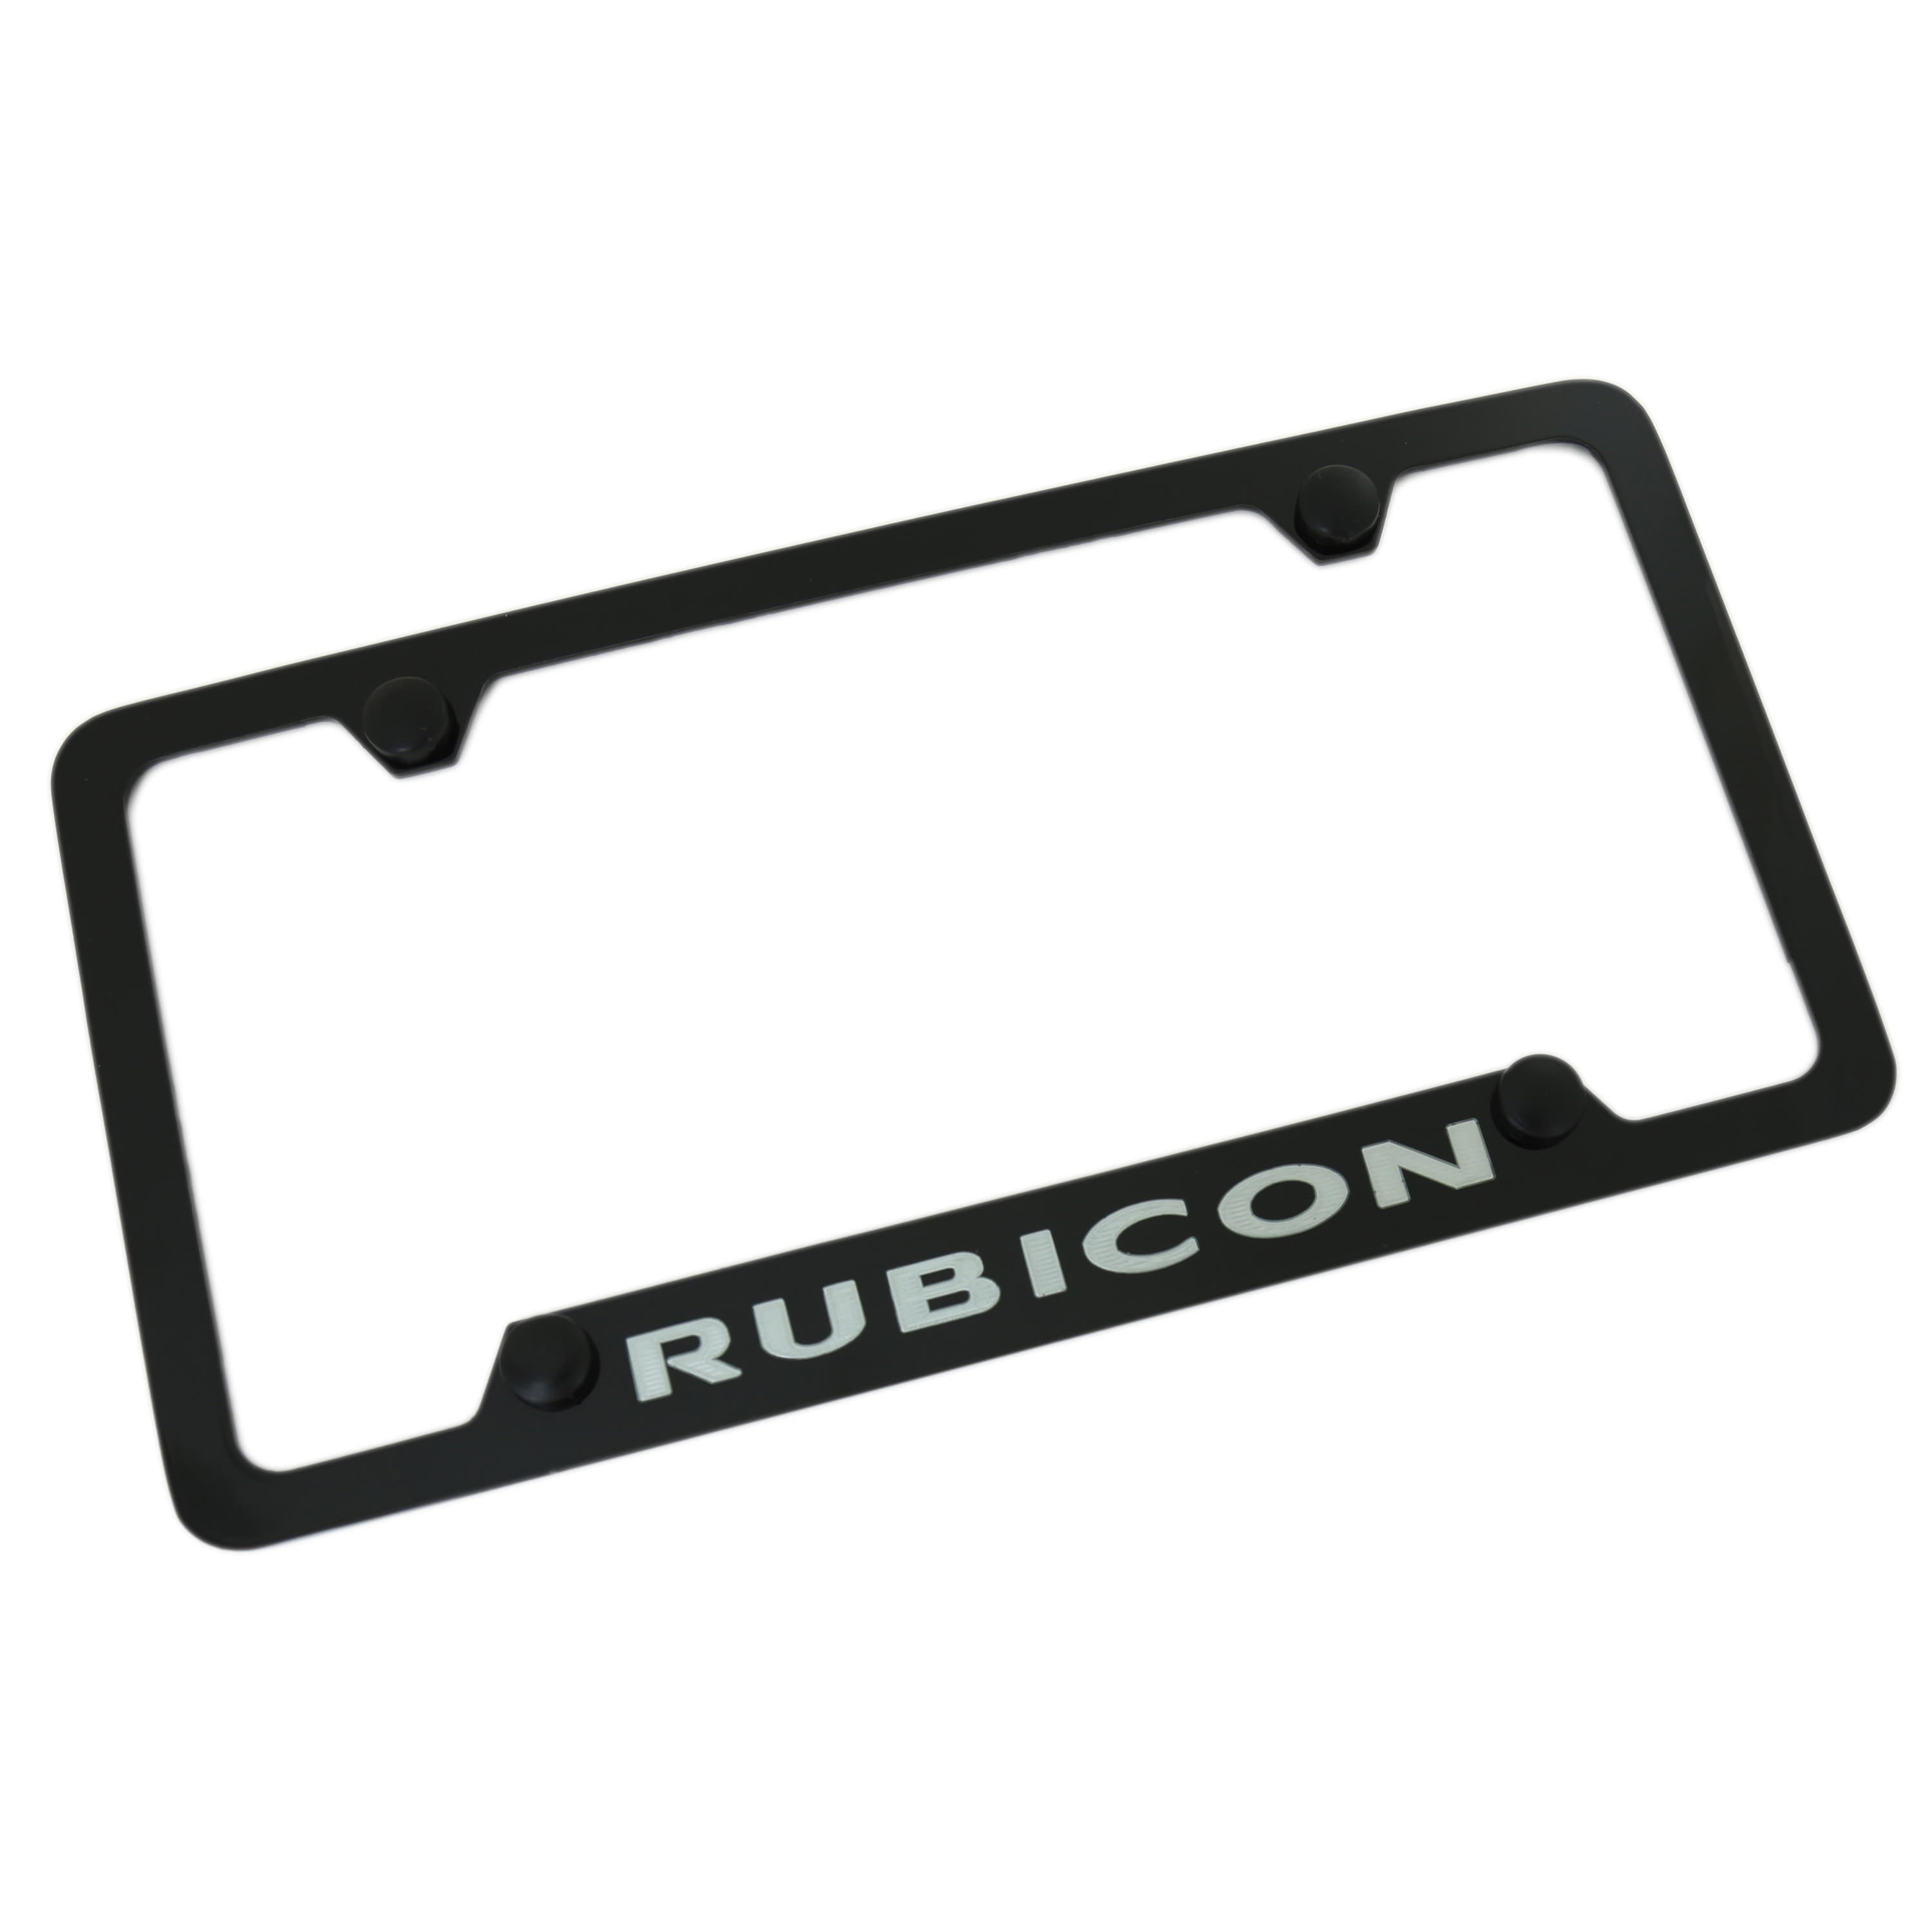 Jeep Rubicon License Plate Frame With 4 Holes (Black) - Custom Werks